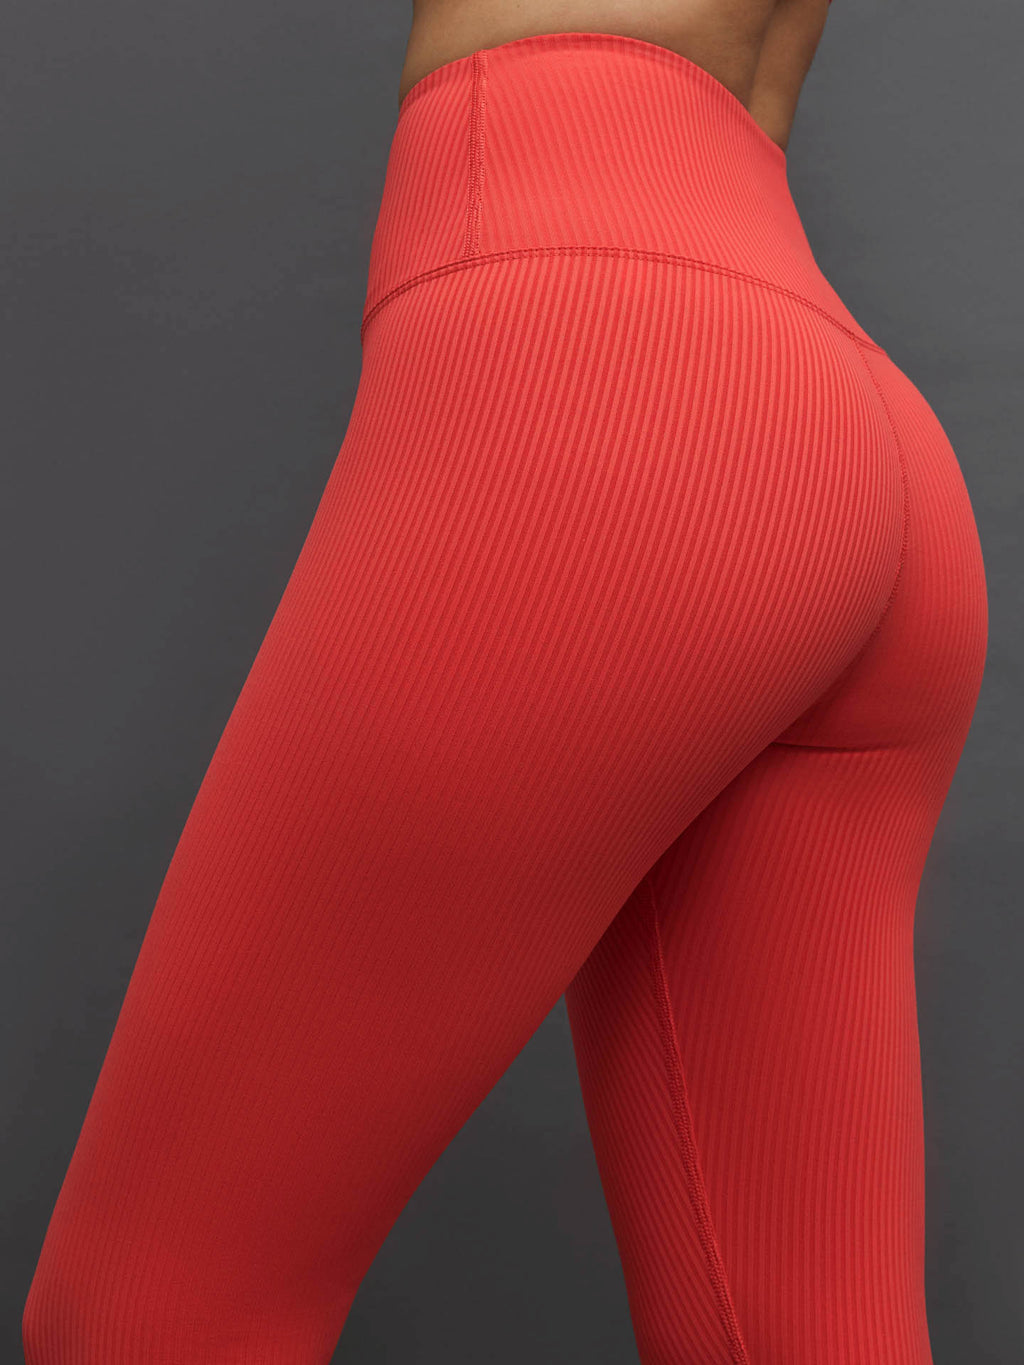 Carbon 38 Ribbed Regular Rise 7/8 Legging - Ruby Red - Size Small